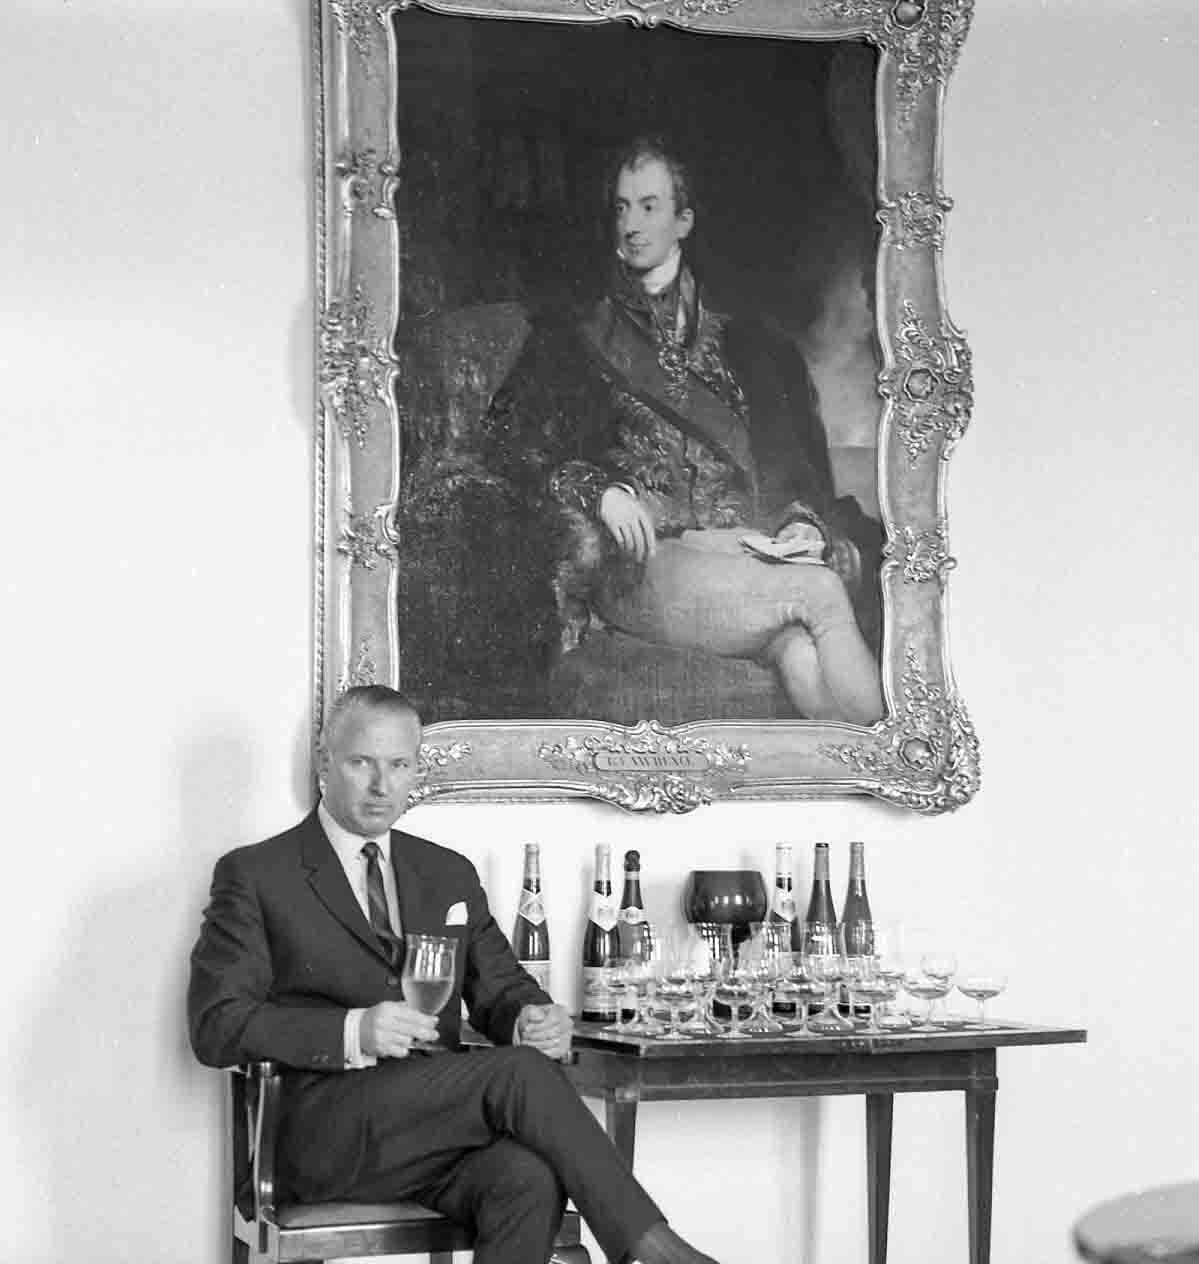 Prince Paul Alfons von Metternich-Winneburg sipping a glass of Metternich sparkling wine in front of an oil painting depicting his famous great-grandfather, Prince Clement von Metternich.